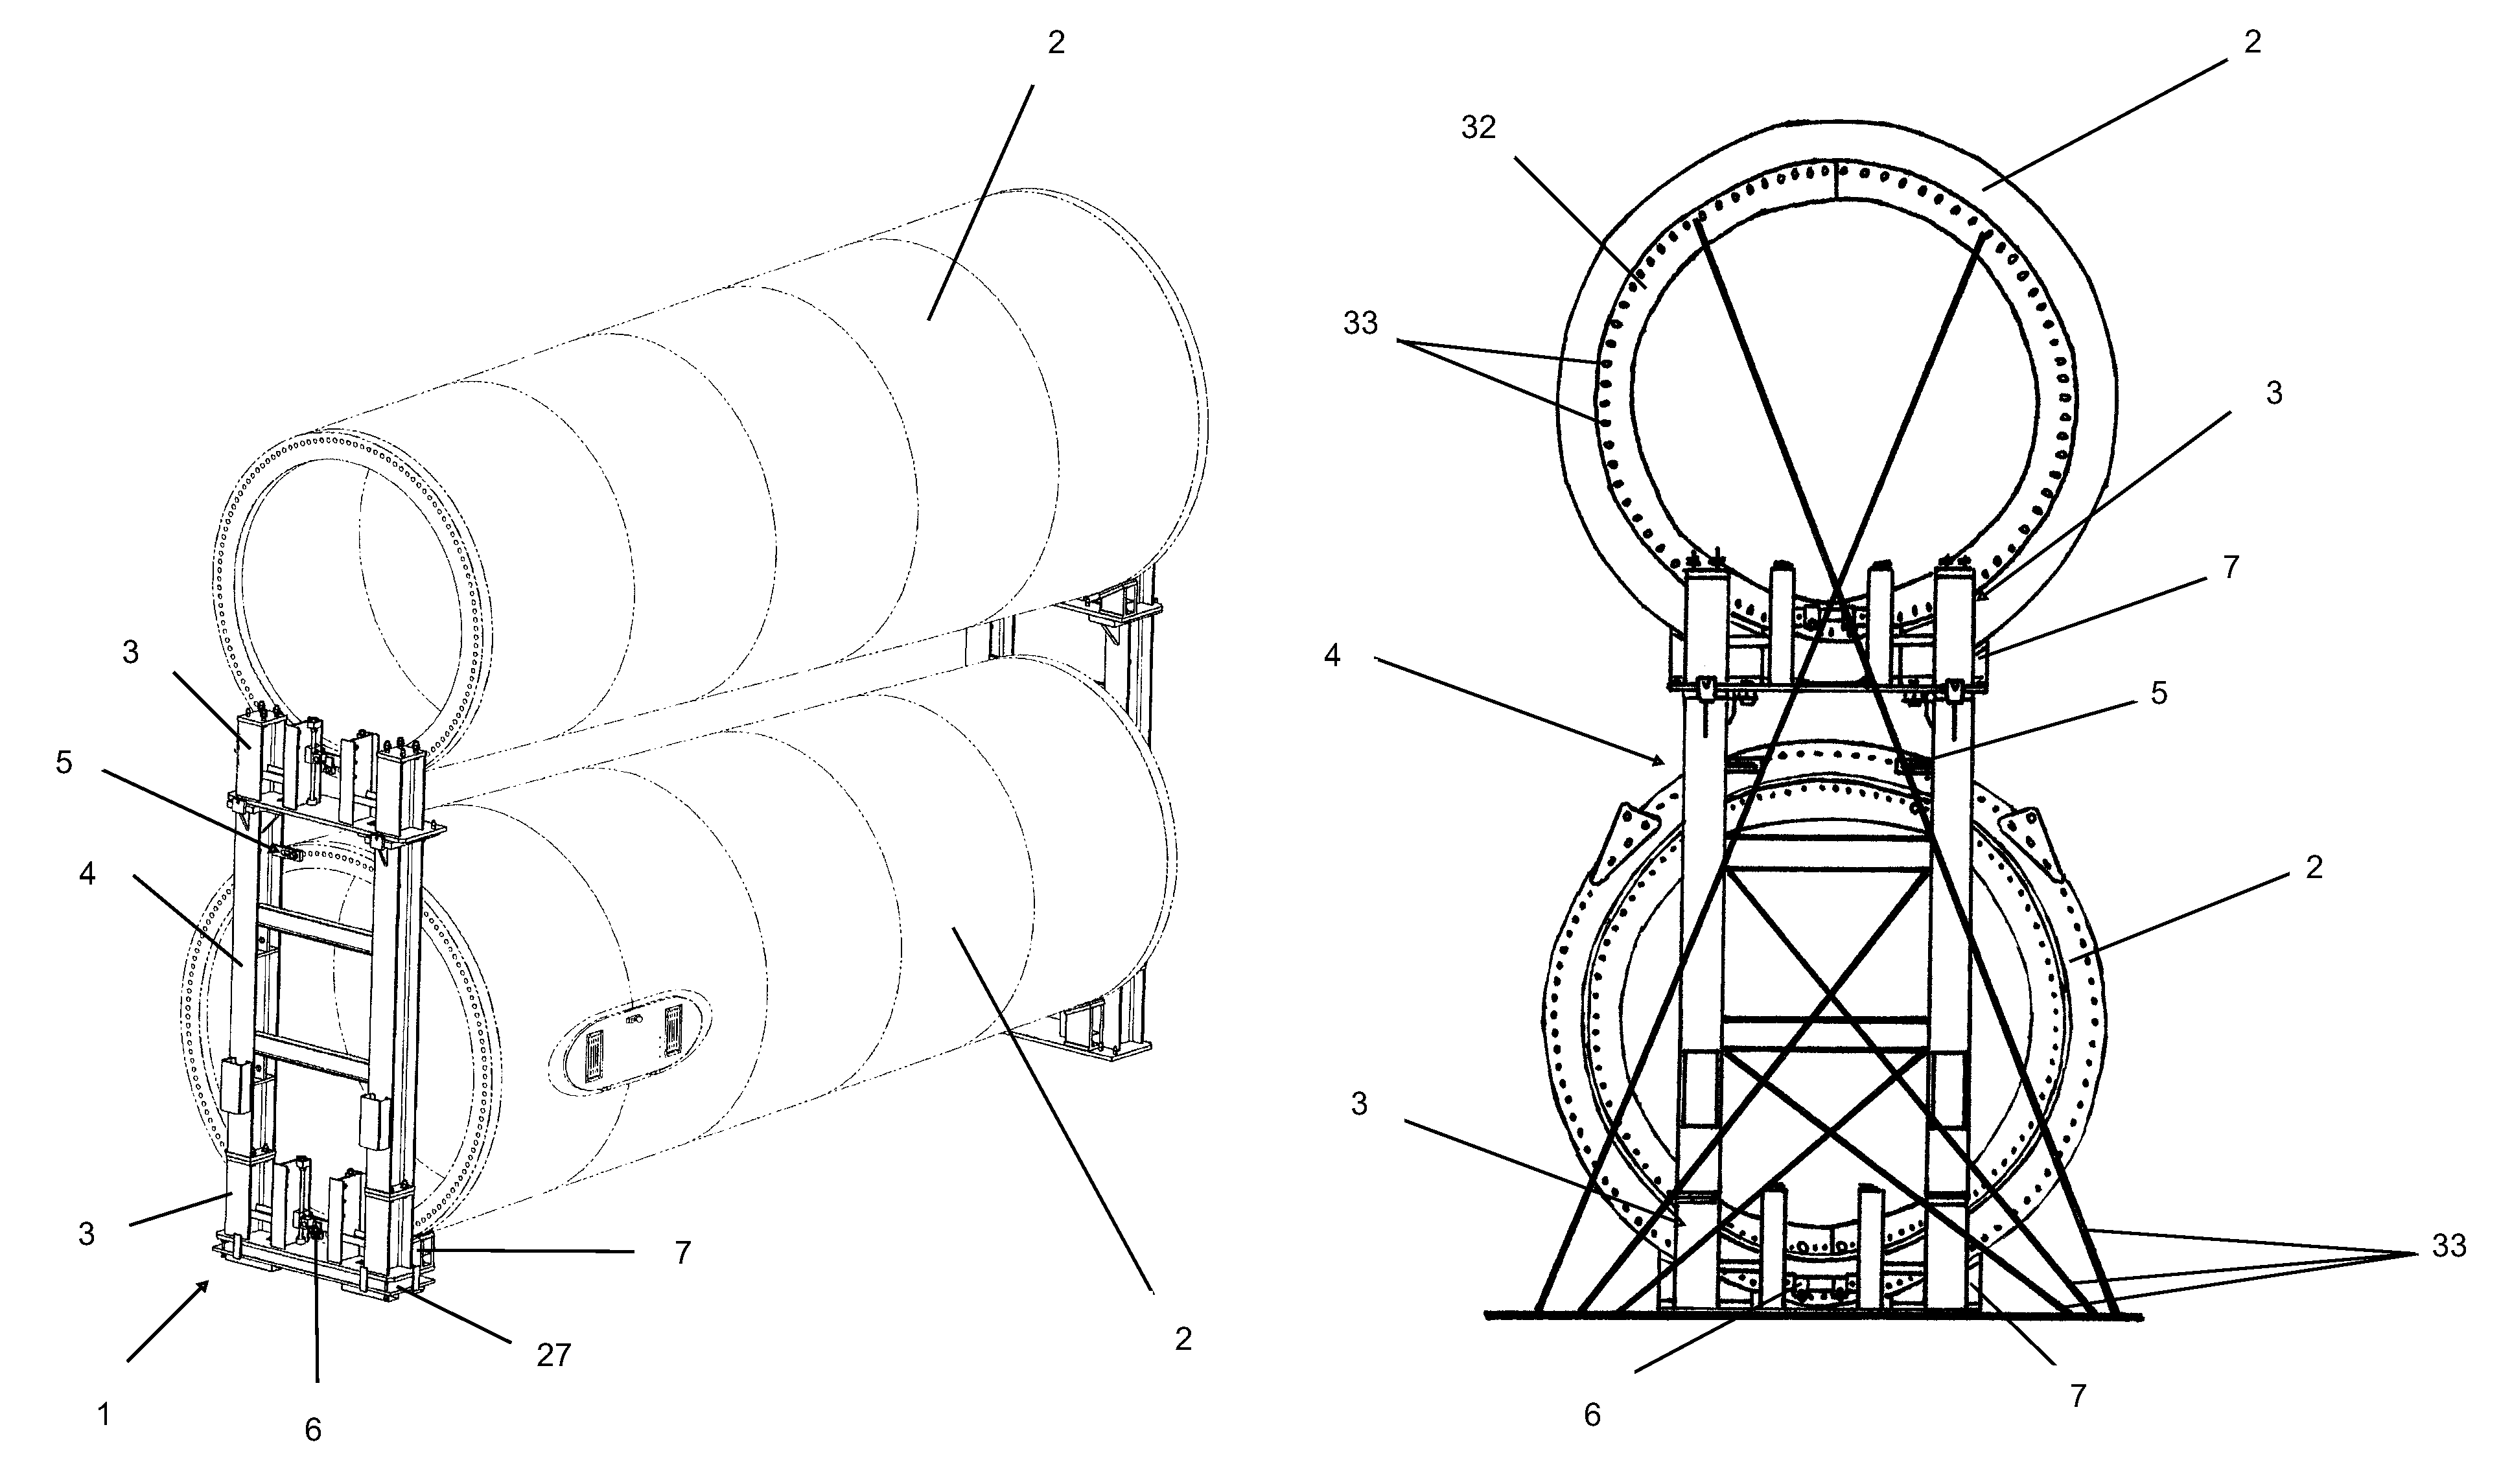 Transporting tool for tower sections of a wind turbine